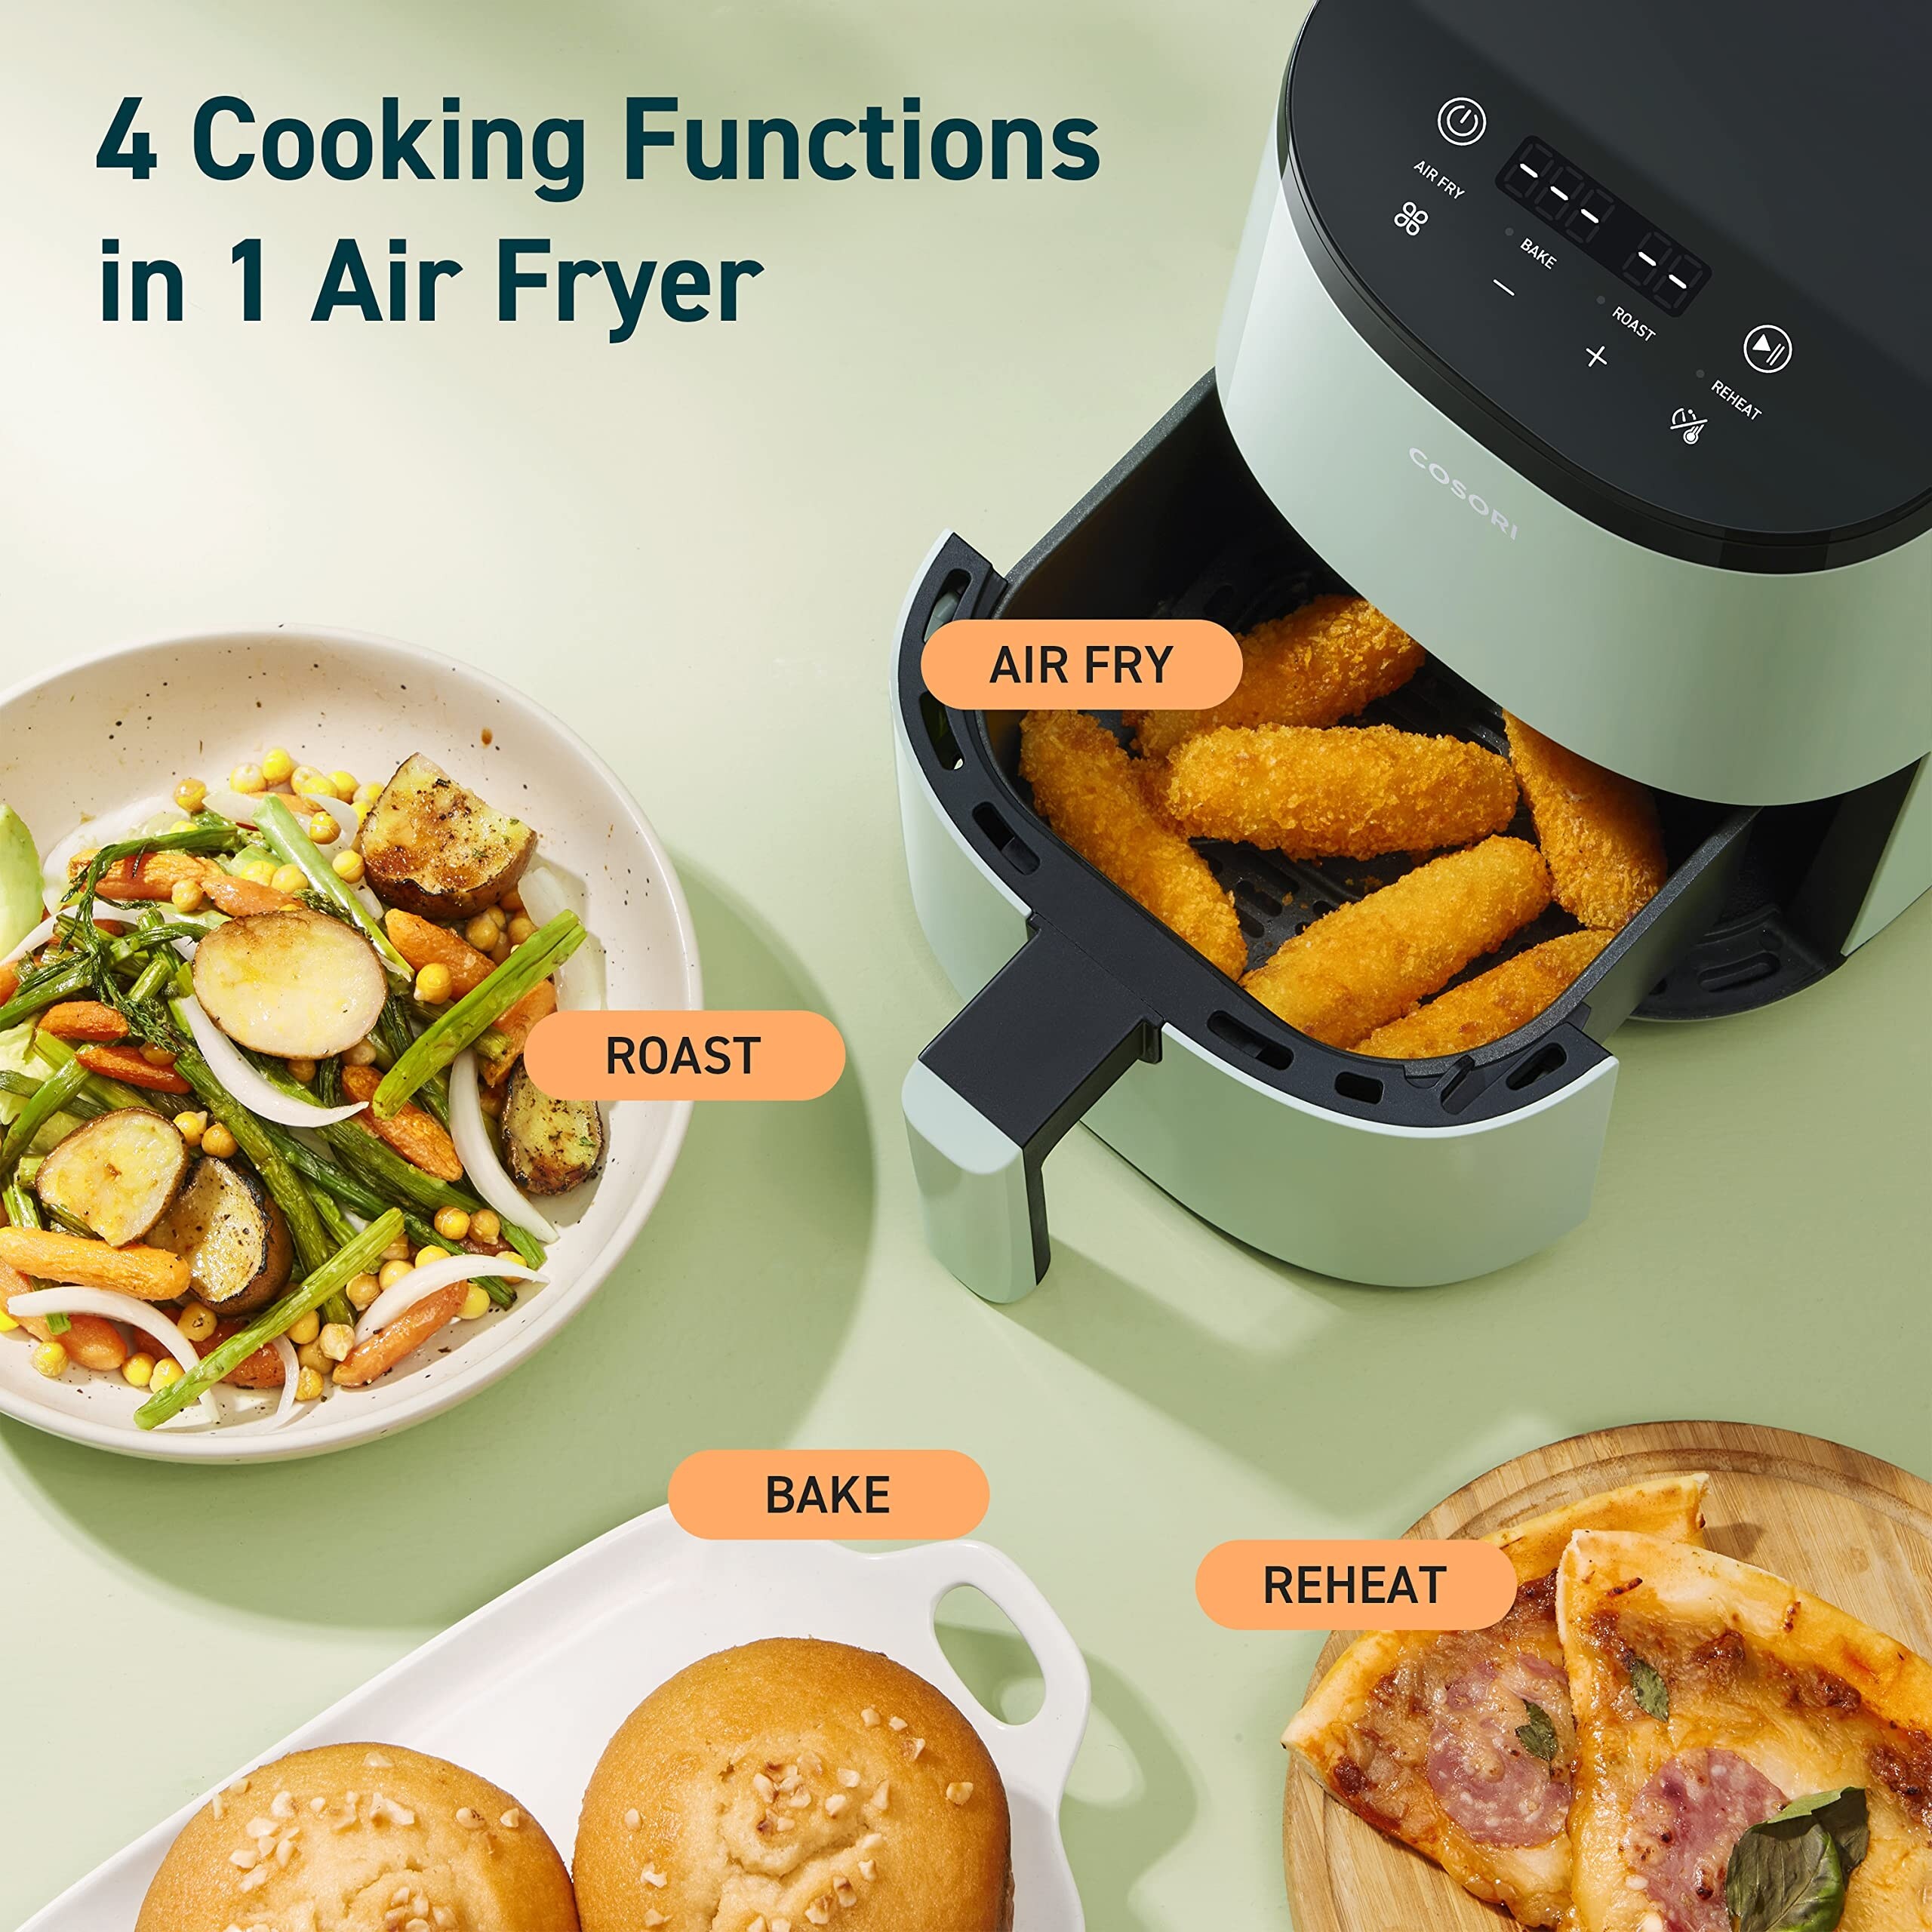 https://ak1.ostkcdn.com/images/products/is/images/direct/108000b1a1c763cbc178d429b32967c15b79cad0/Small-Air-Fryer-Oven-2.1-Qt%2C-4-in-1-Mini-Airfryer%2C-Bake%2C-Roast%2C-Reheat%2C-Space-saving-%26-Low-noise%2C-Nonstick-and-Dishwasher.jpg